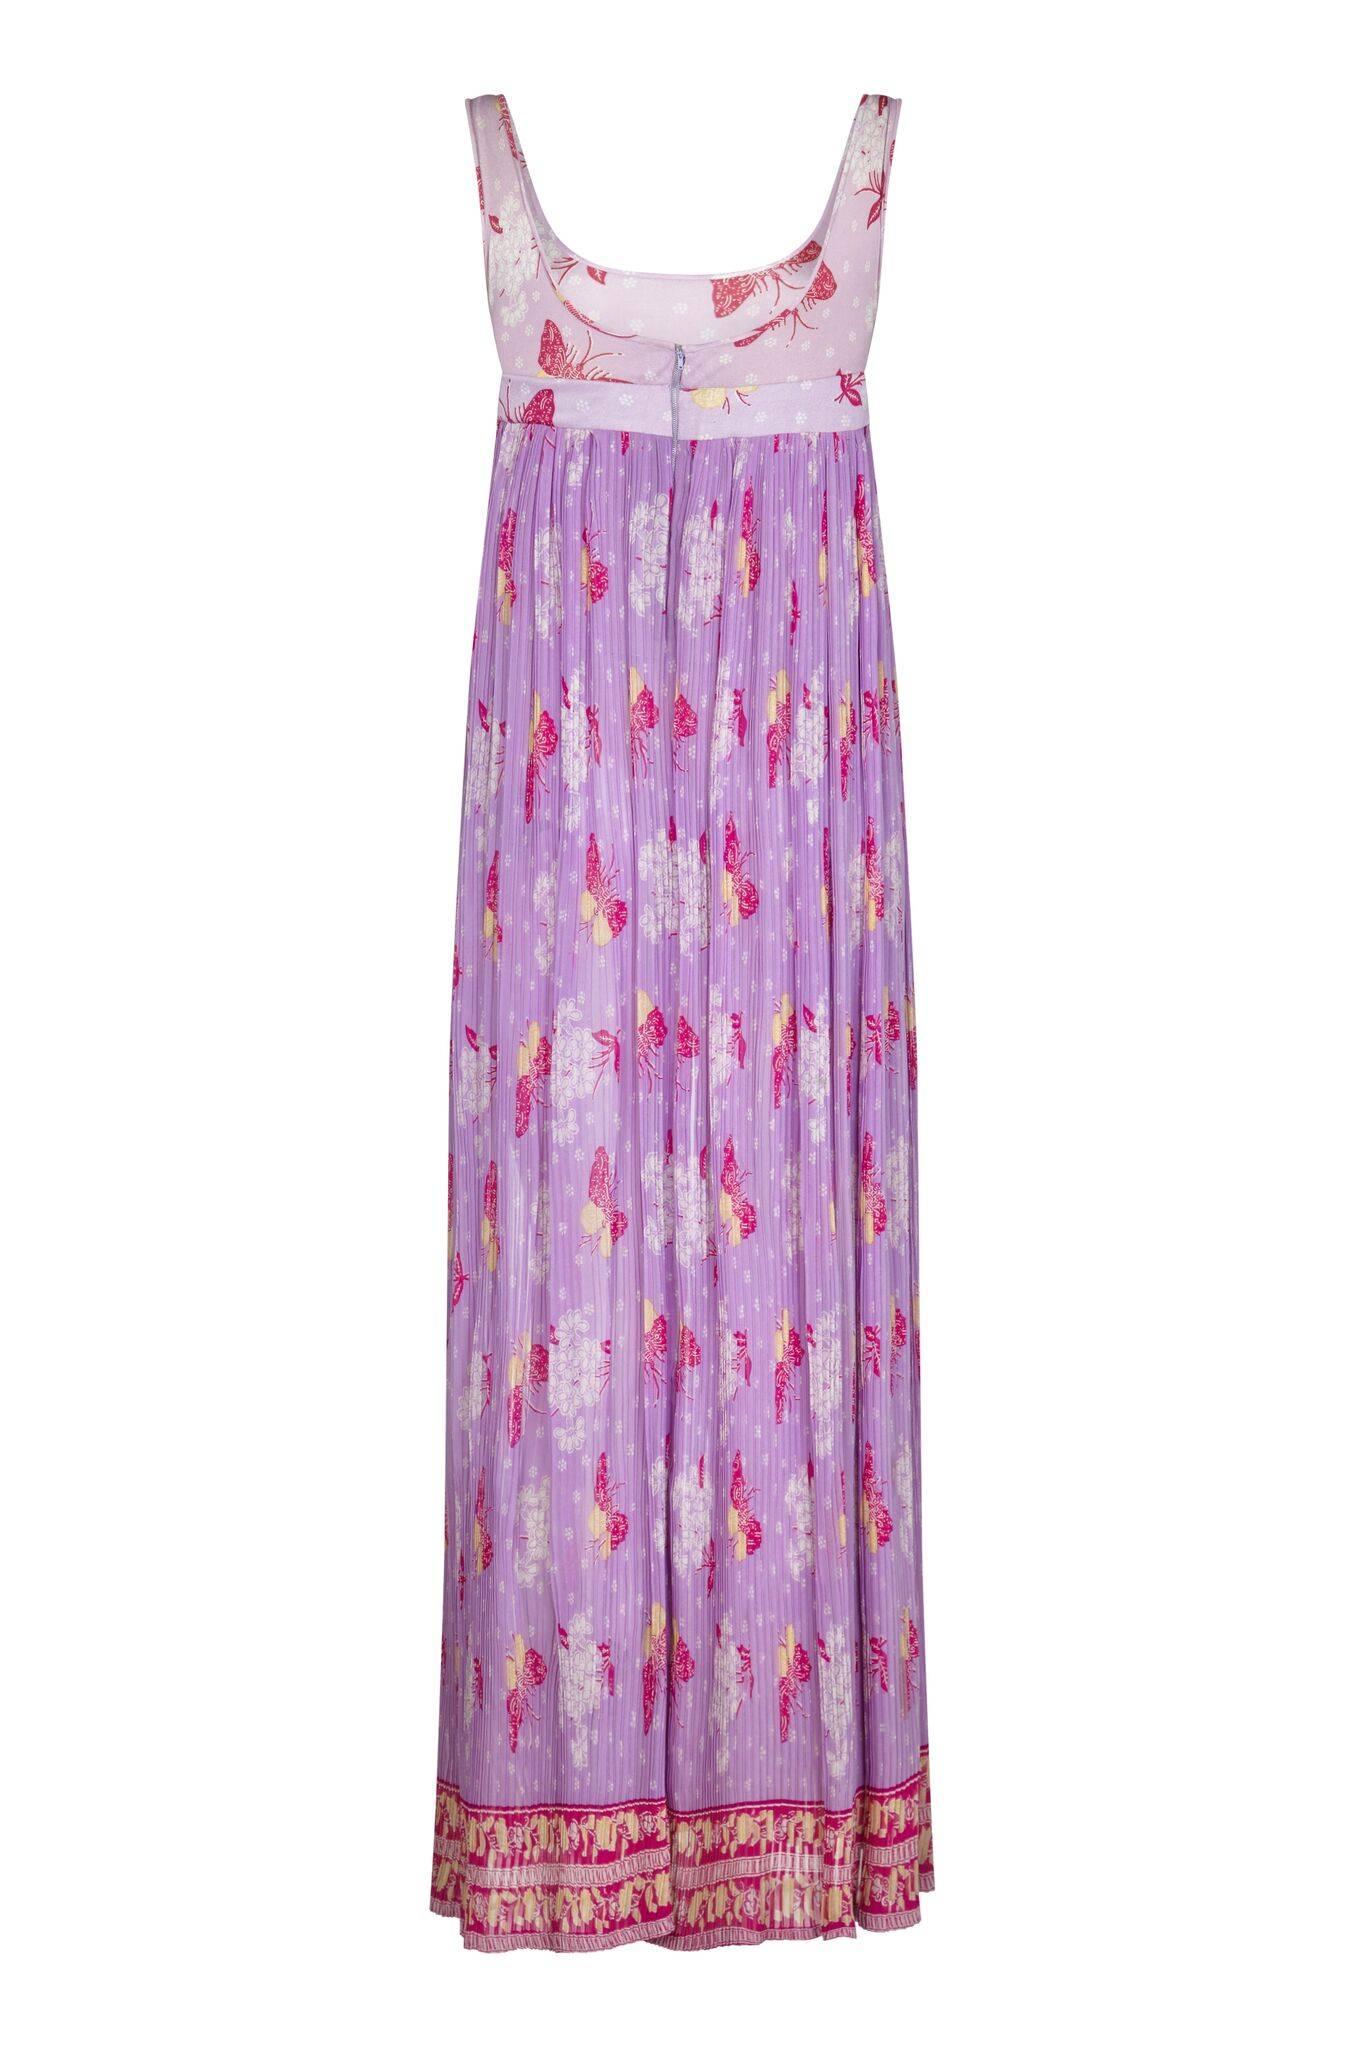 This pretty 1970s purple empire line dress with butterfly motif has a bohemian, summery feel. The full length dress is comprised of a fine rayon fabric for the skirt in a lilac shade which softens into a pink hue around the jersey bodice, and wide